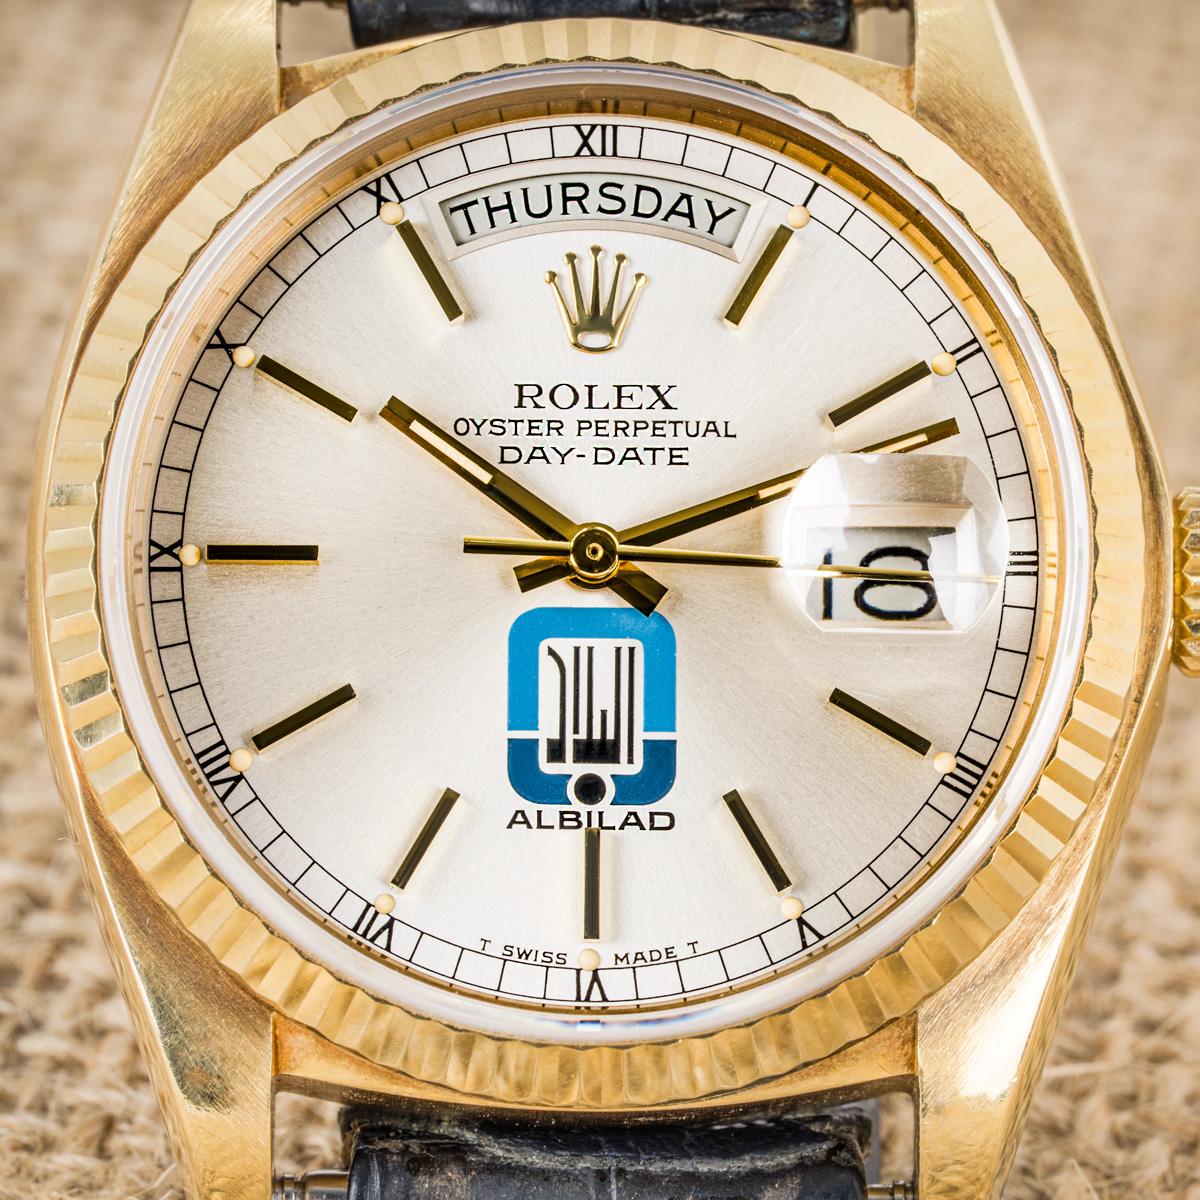 A Rolex Day-Date 36mm crafted in yellow gold by Rolex. Featuring a champagne dial with a distinctive logo of the Albilad Fire Fighting Systems company from Saudi Arabia. Complementing the dial is a yellow gold fluted bezel and a screw-down